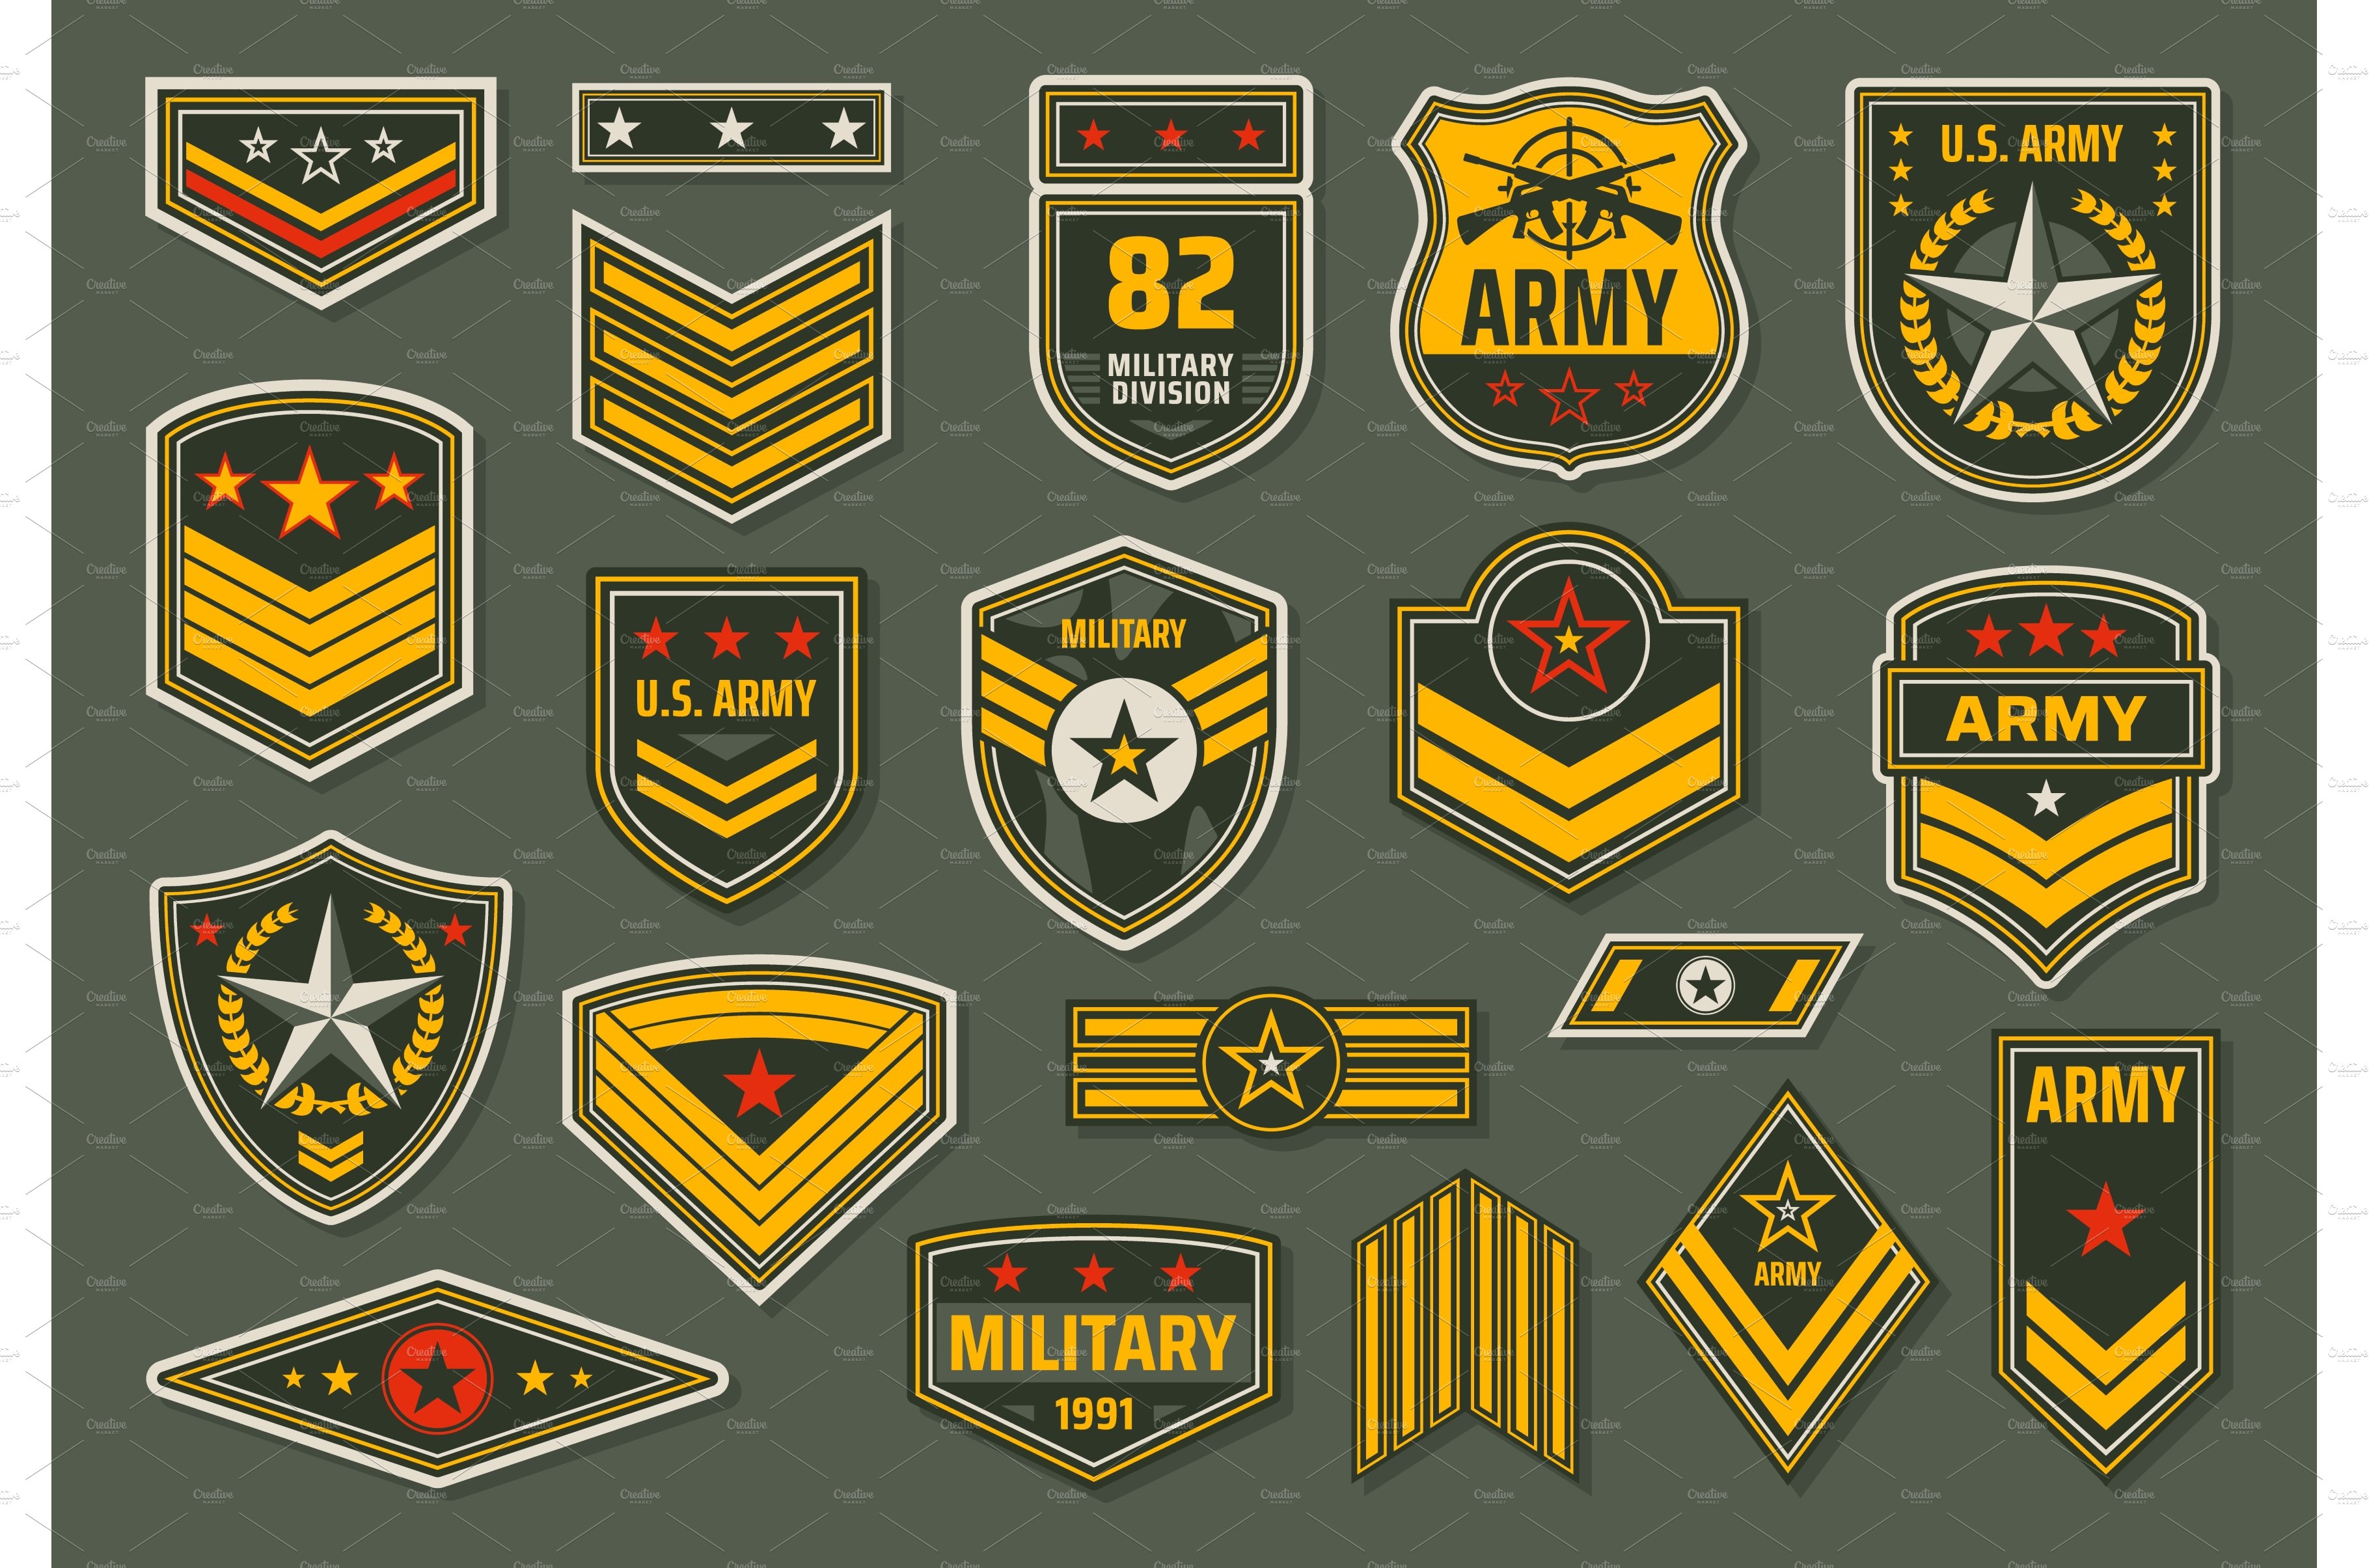 Armed forces badges, insignia cover image.